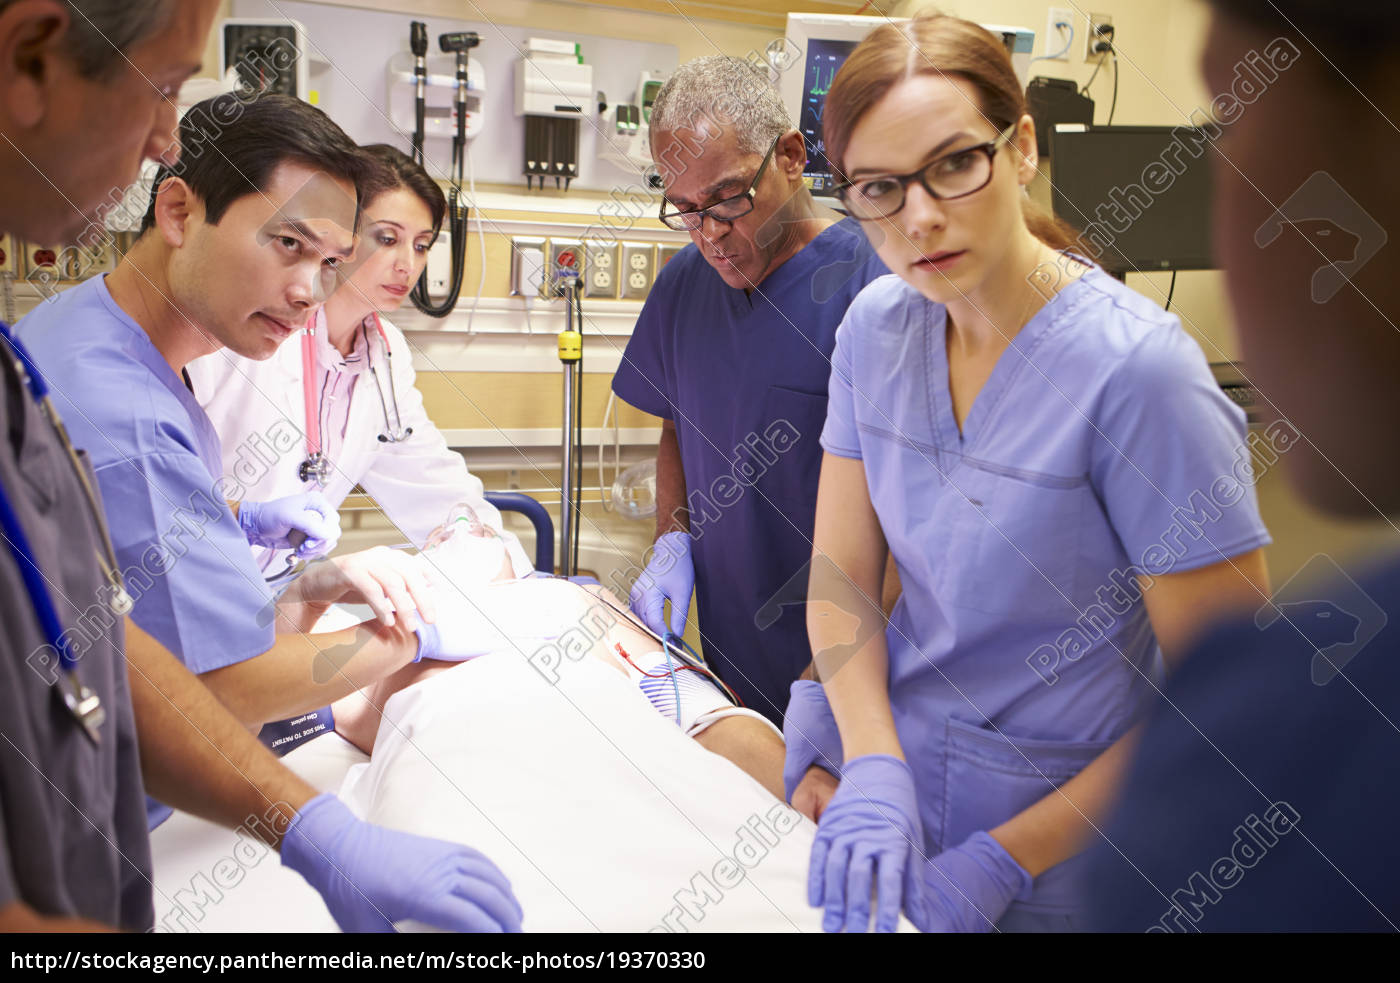 Stock Image 19370330 Medical Team Working On Patient In Emergency Room